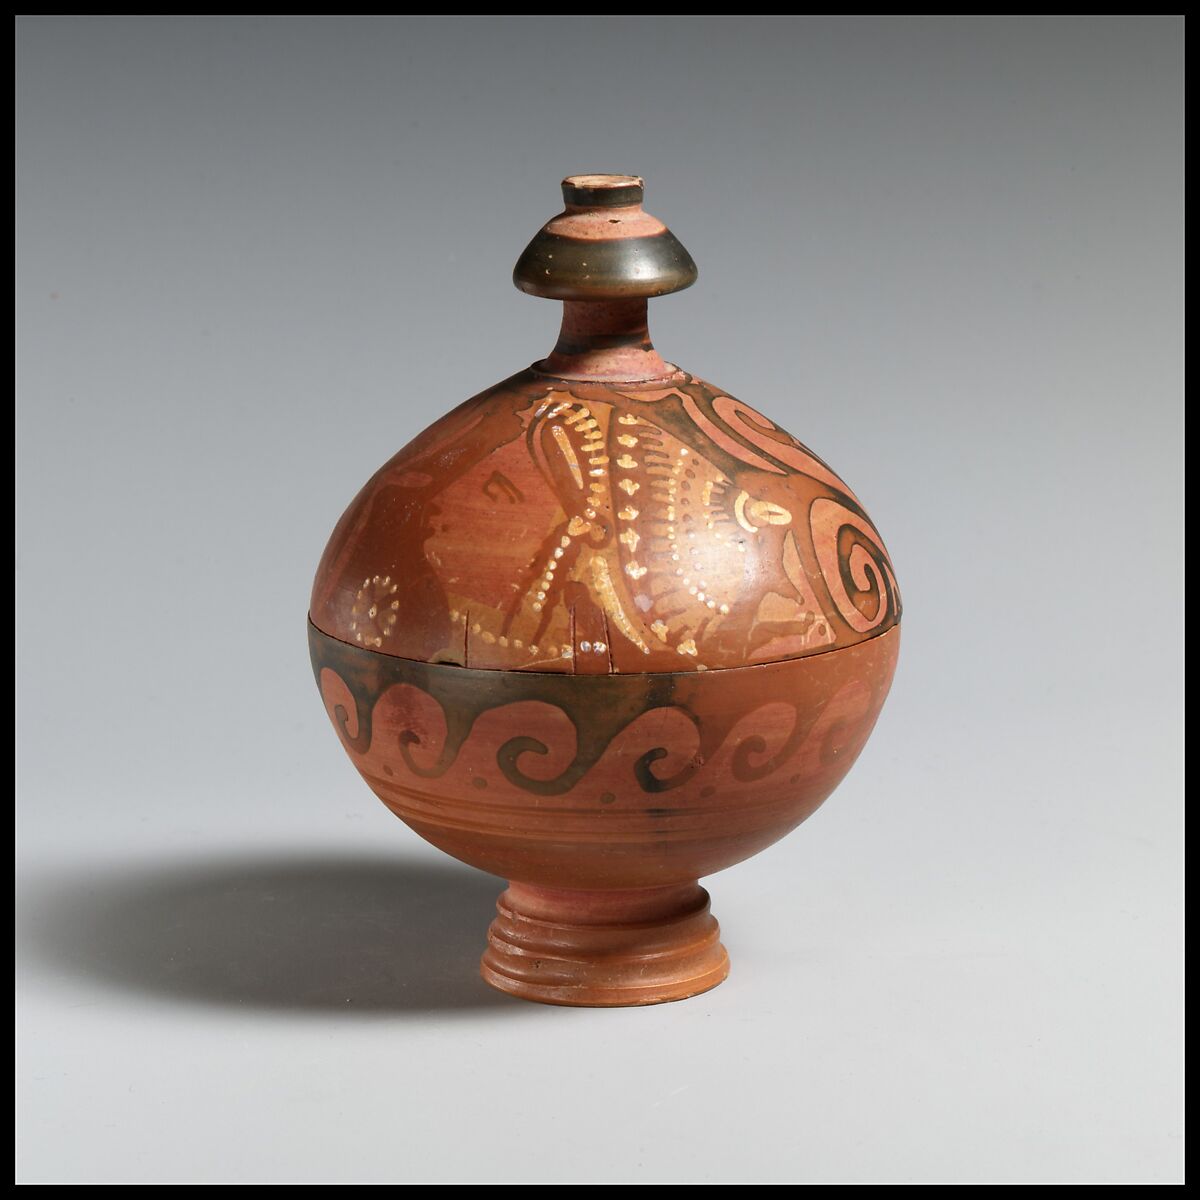 Pyxis, Attributed to the Kantharos Group, Terracotta, Greek, South Italian, Apulian 